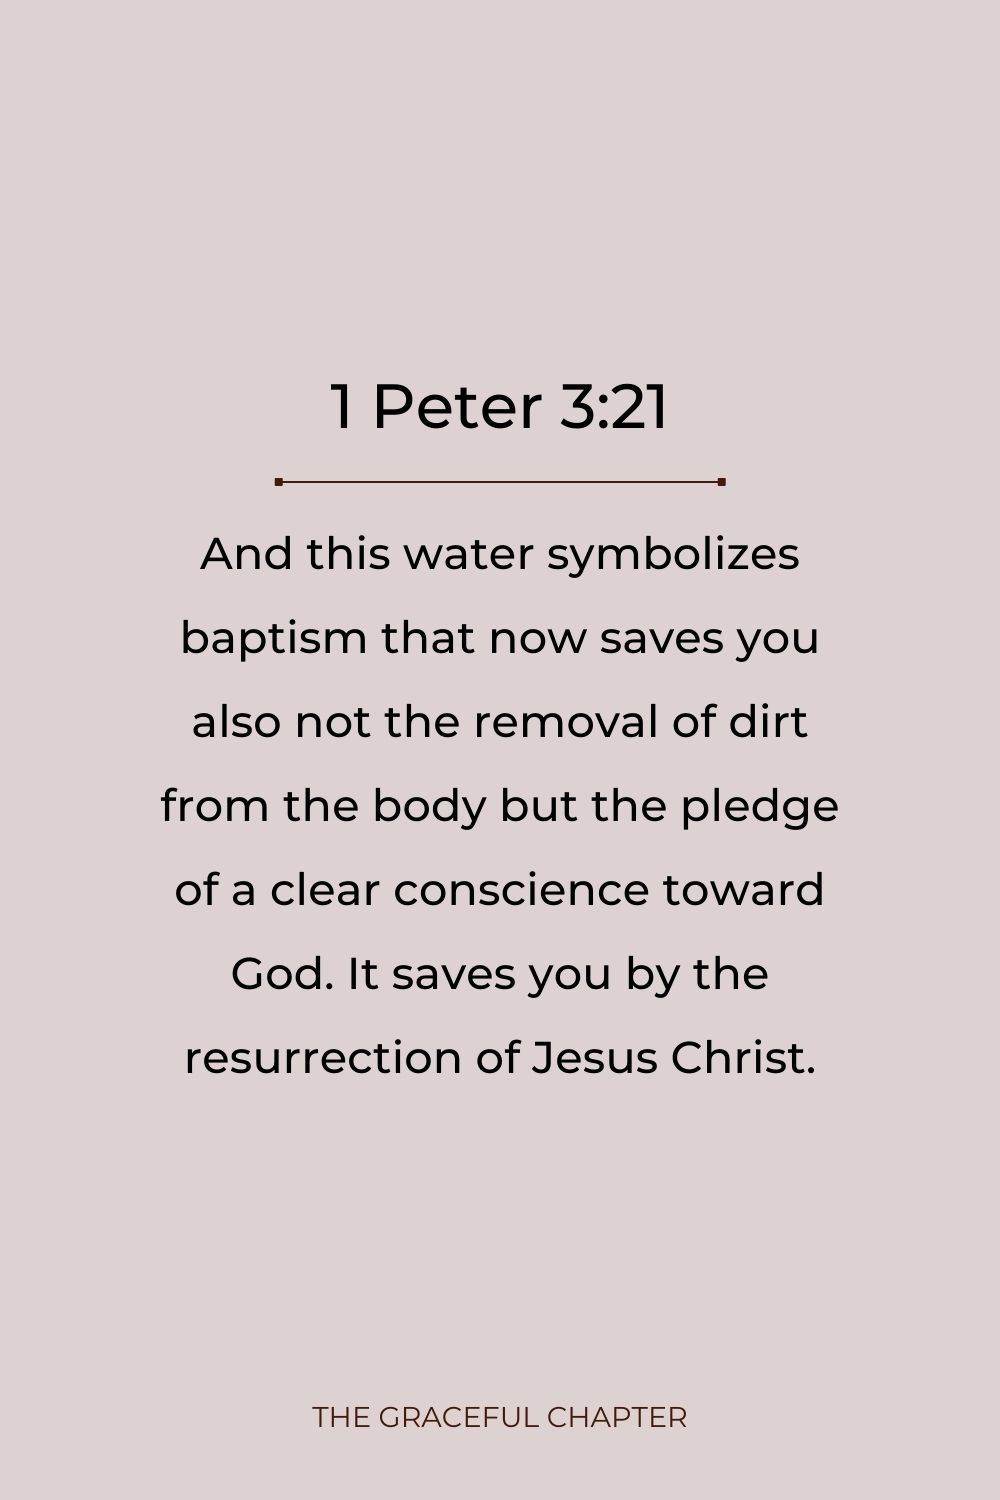 And this water symbolizes baptism that now saves you also not the removal of dirt from the body but the pledge of a clear conscience toward God. It saves you by the resurrection of Jesus Christ. 1 Peter 3:21